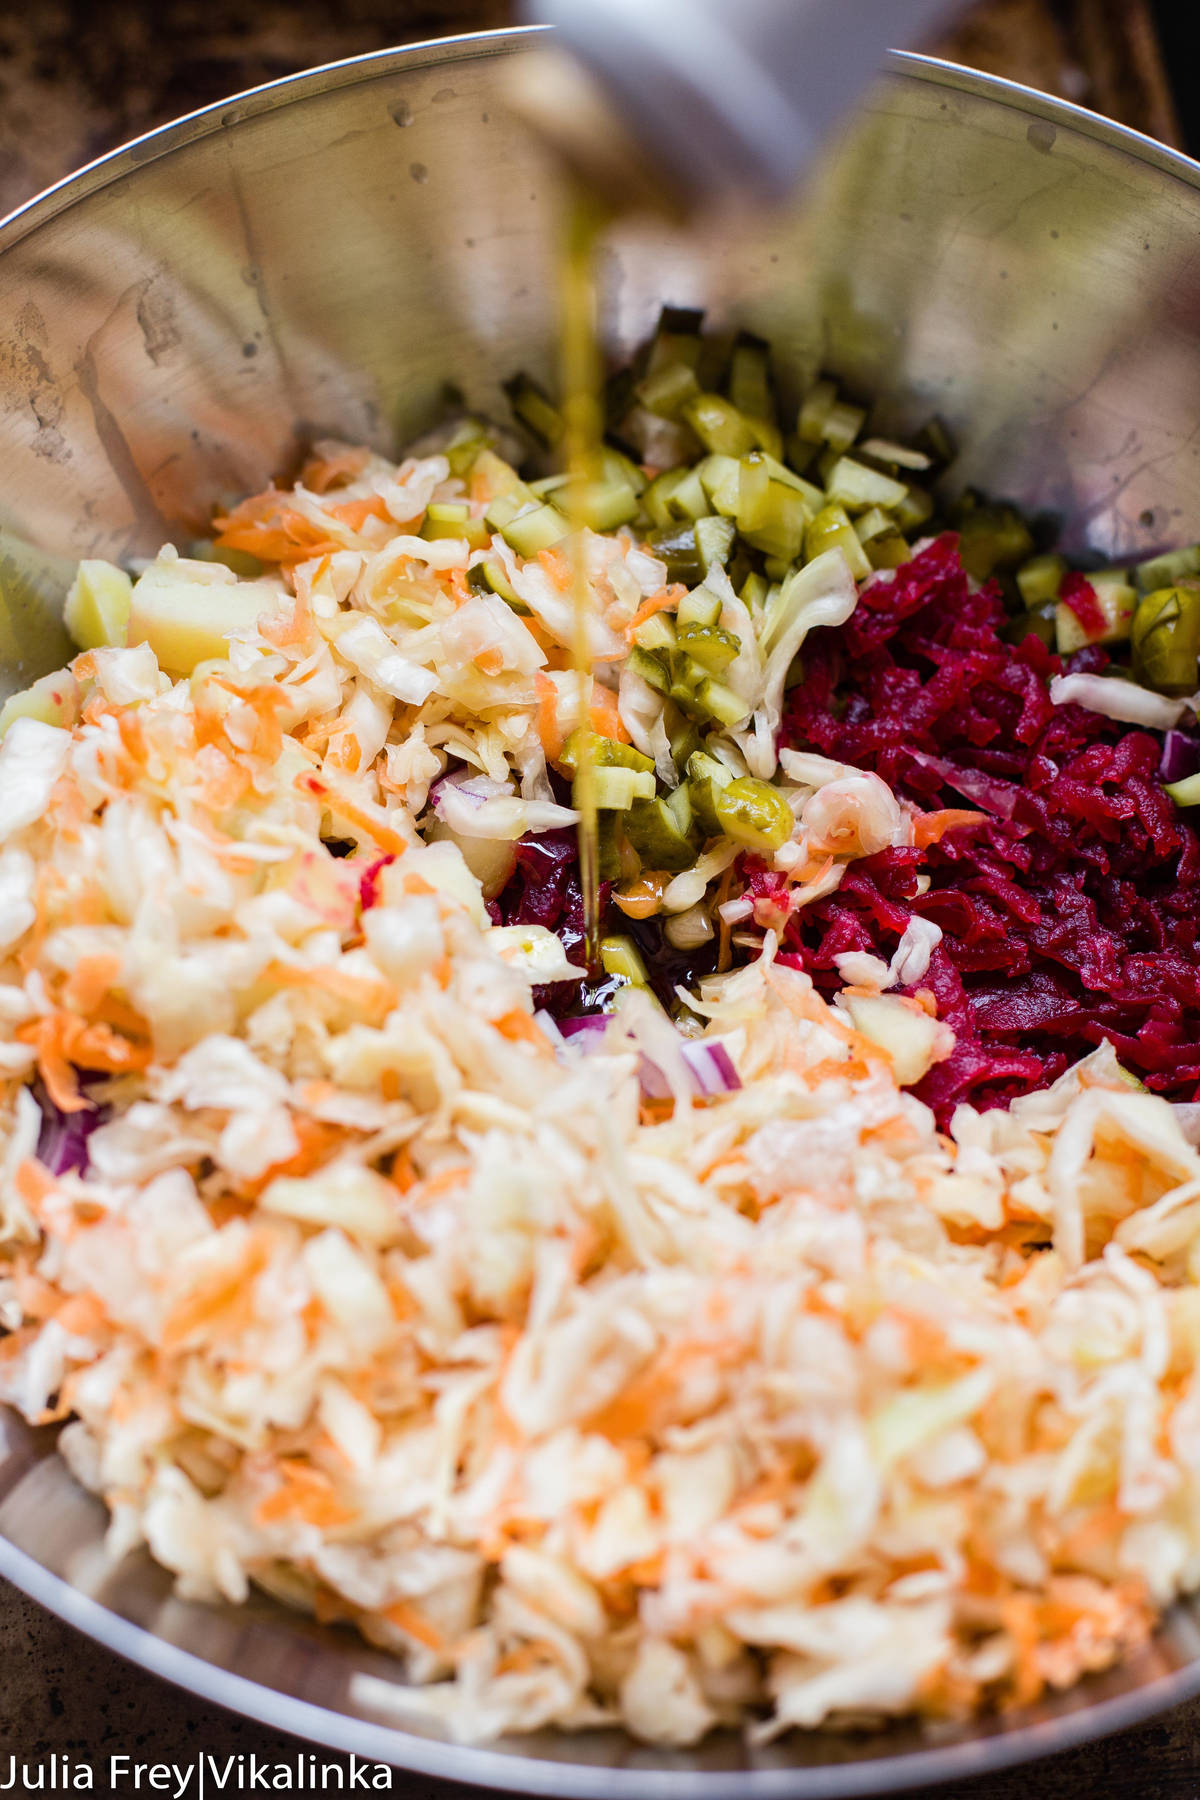 sauerkraut, grated beets and pickles in a stainless steel bowl